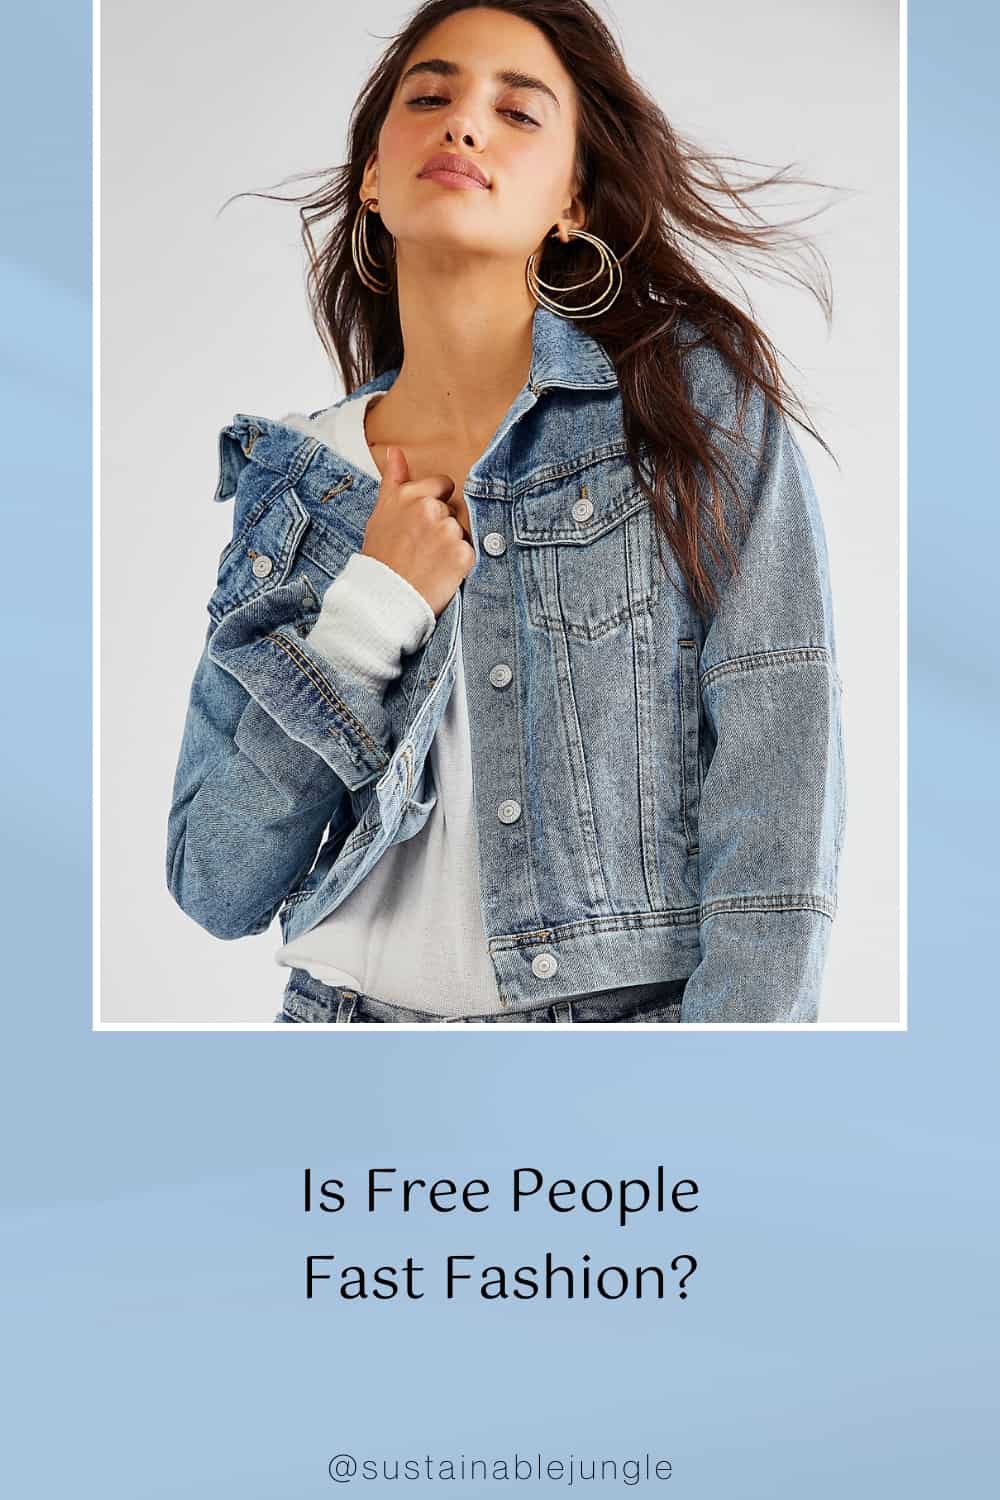 Is Free People Fast Fashion? Image by Free People #isfreepeoplefastfashion #isfreepeopleethical #freepeoplesustainability #isfreepeoplesustainable #isfreepeopleagoodbrand #sustainablejungle